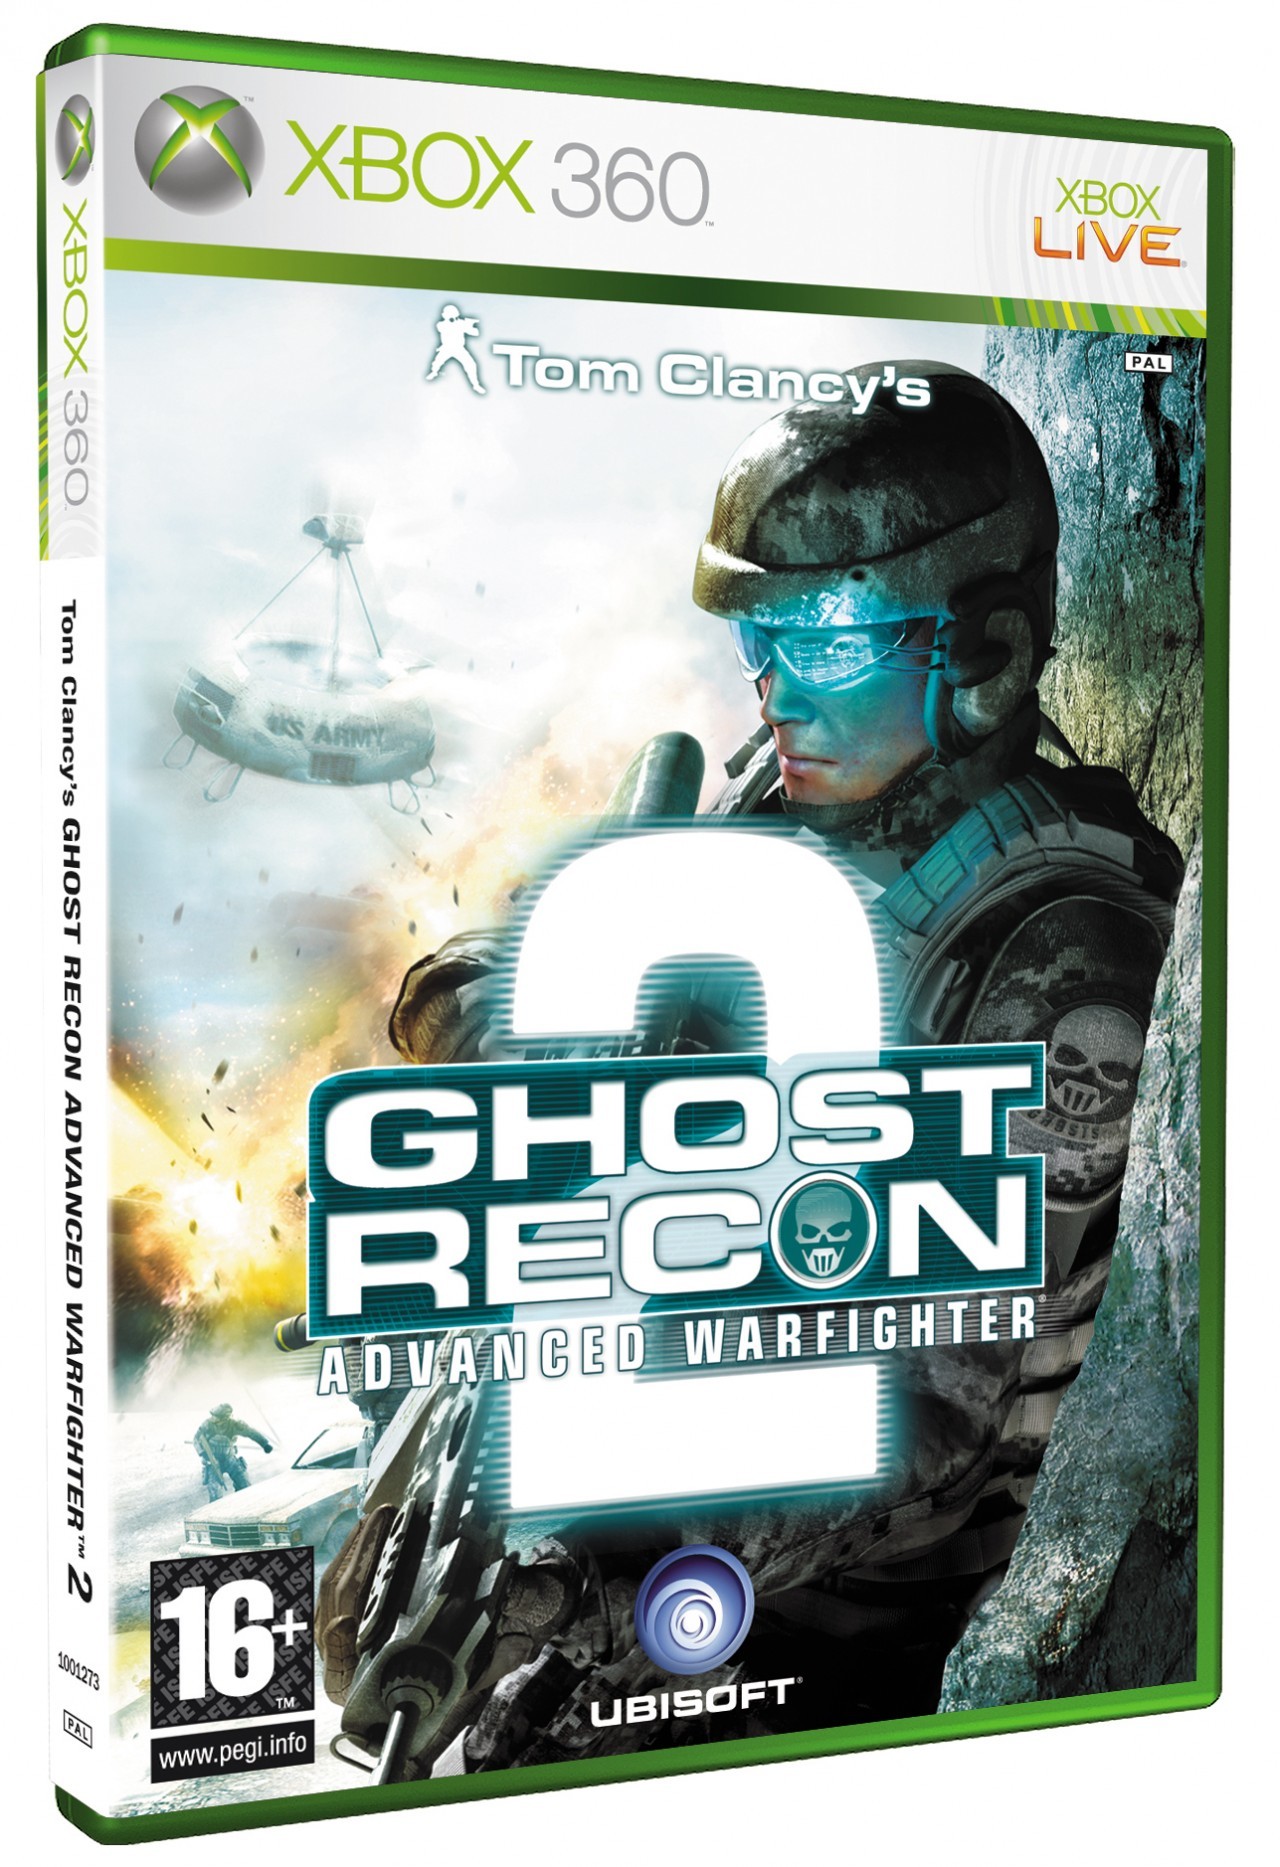 Tom Clancys Ghost Recon Advanced Warfighter PC Game Free